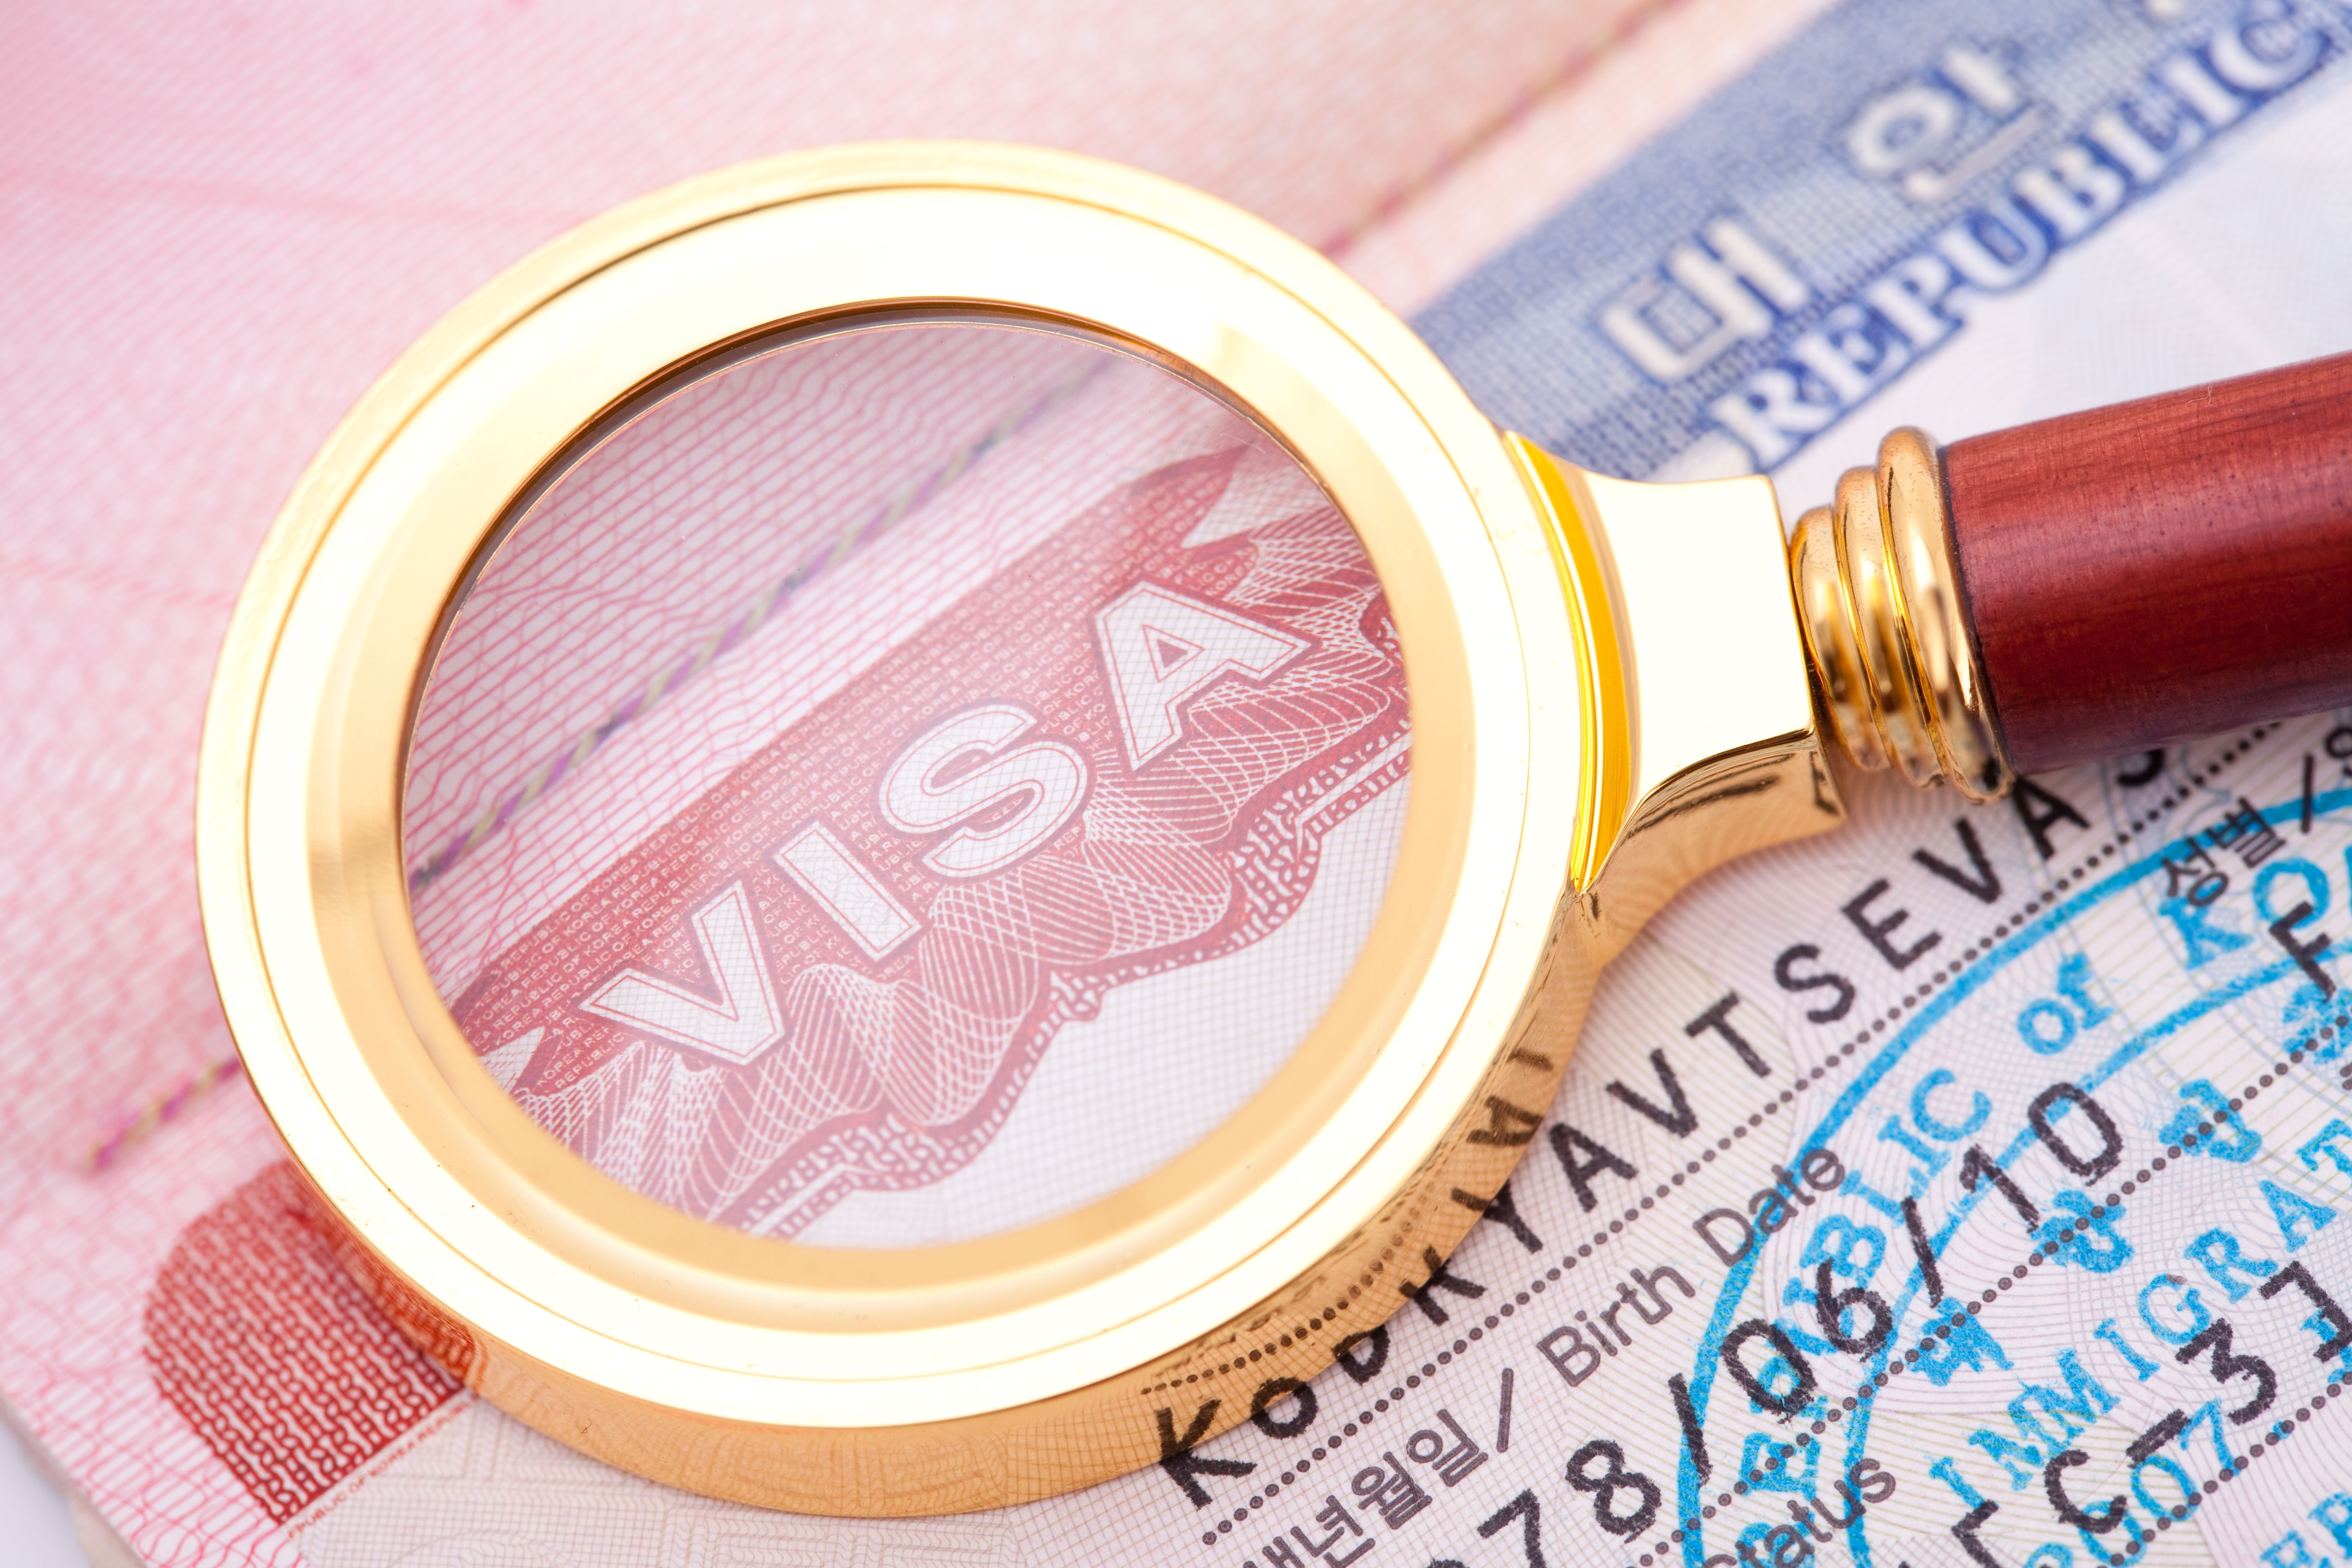 L-1 VISA FOR MERCHANTS: USING YOUR COMPANY TO ENTER THE UNITED STATES